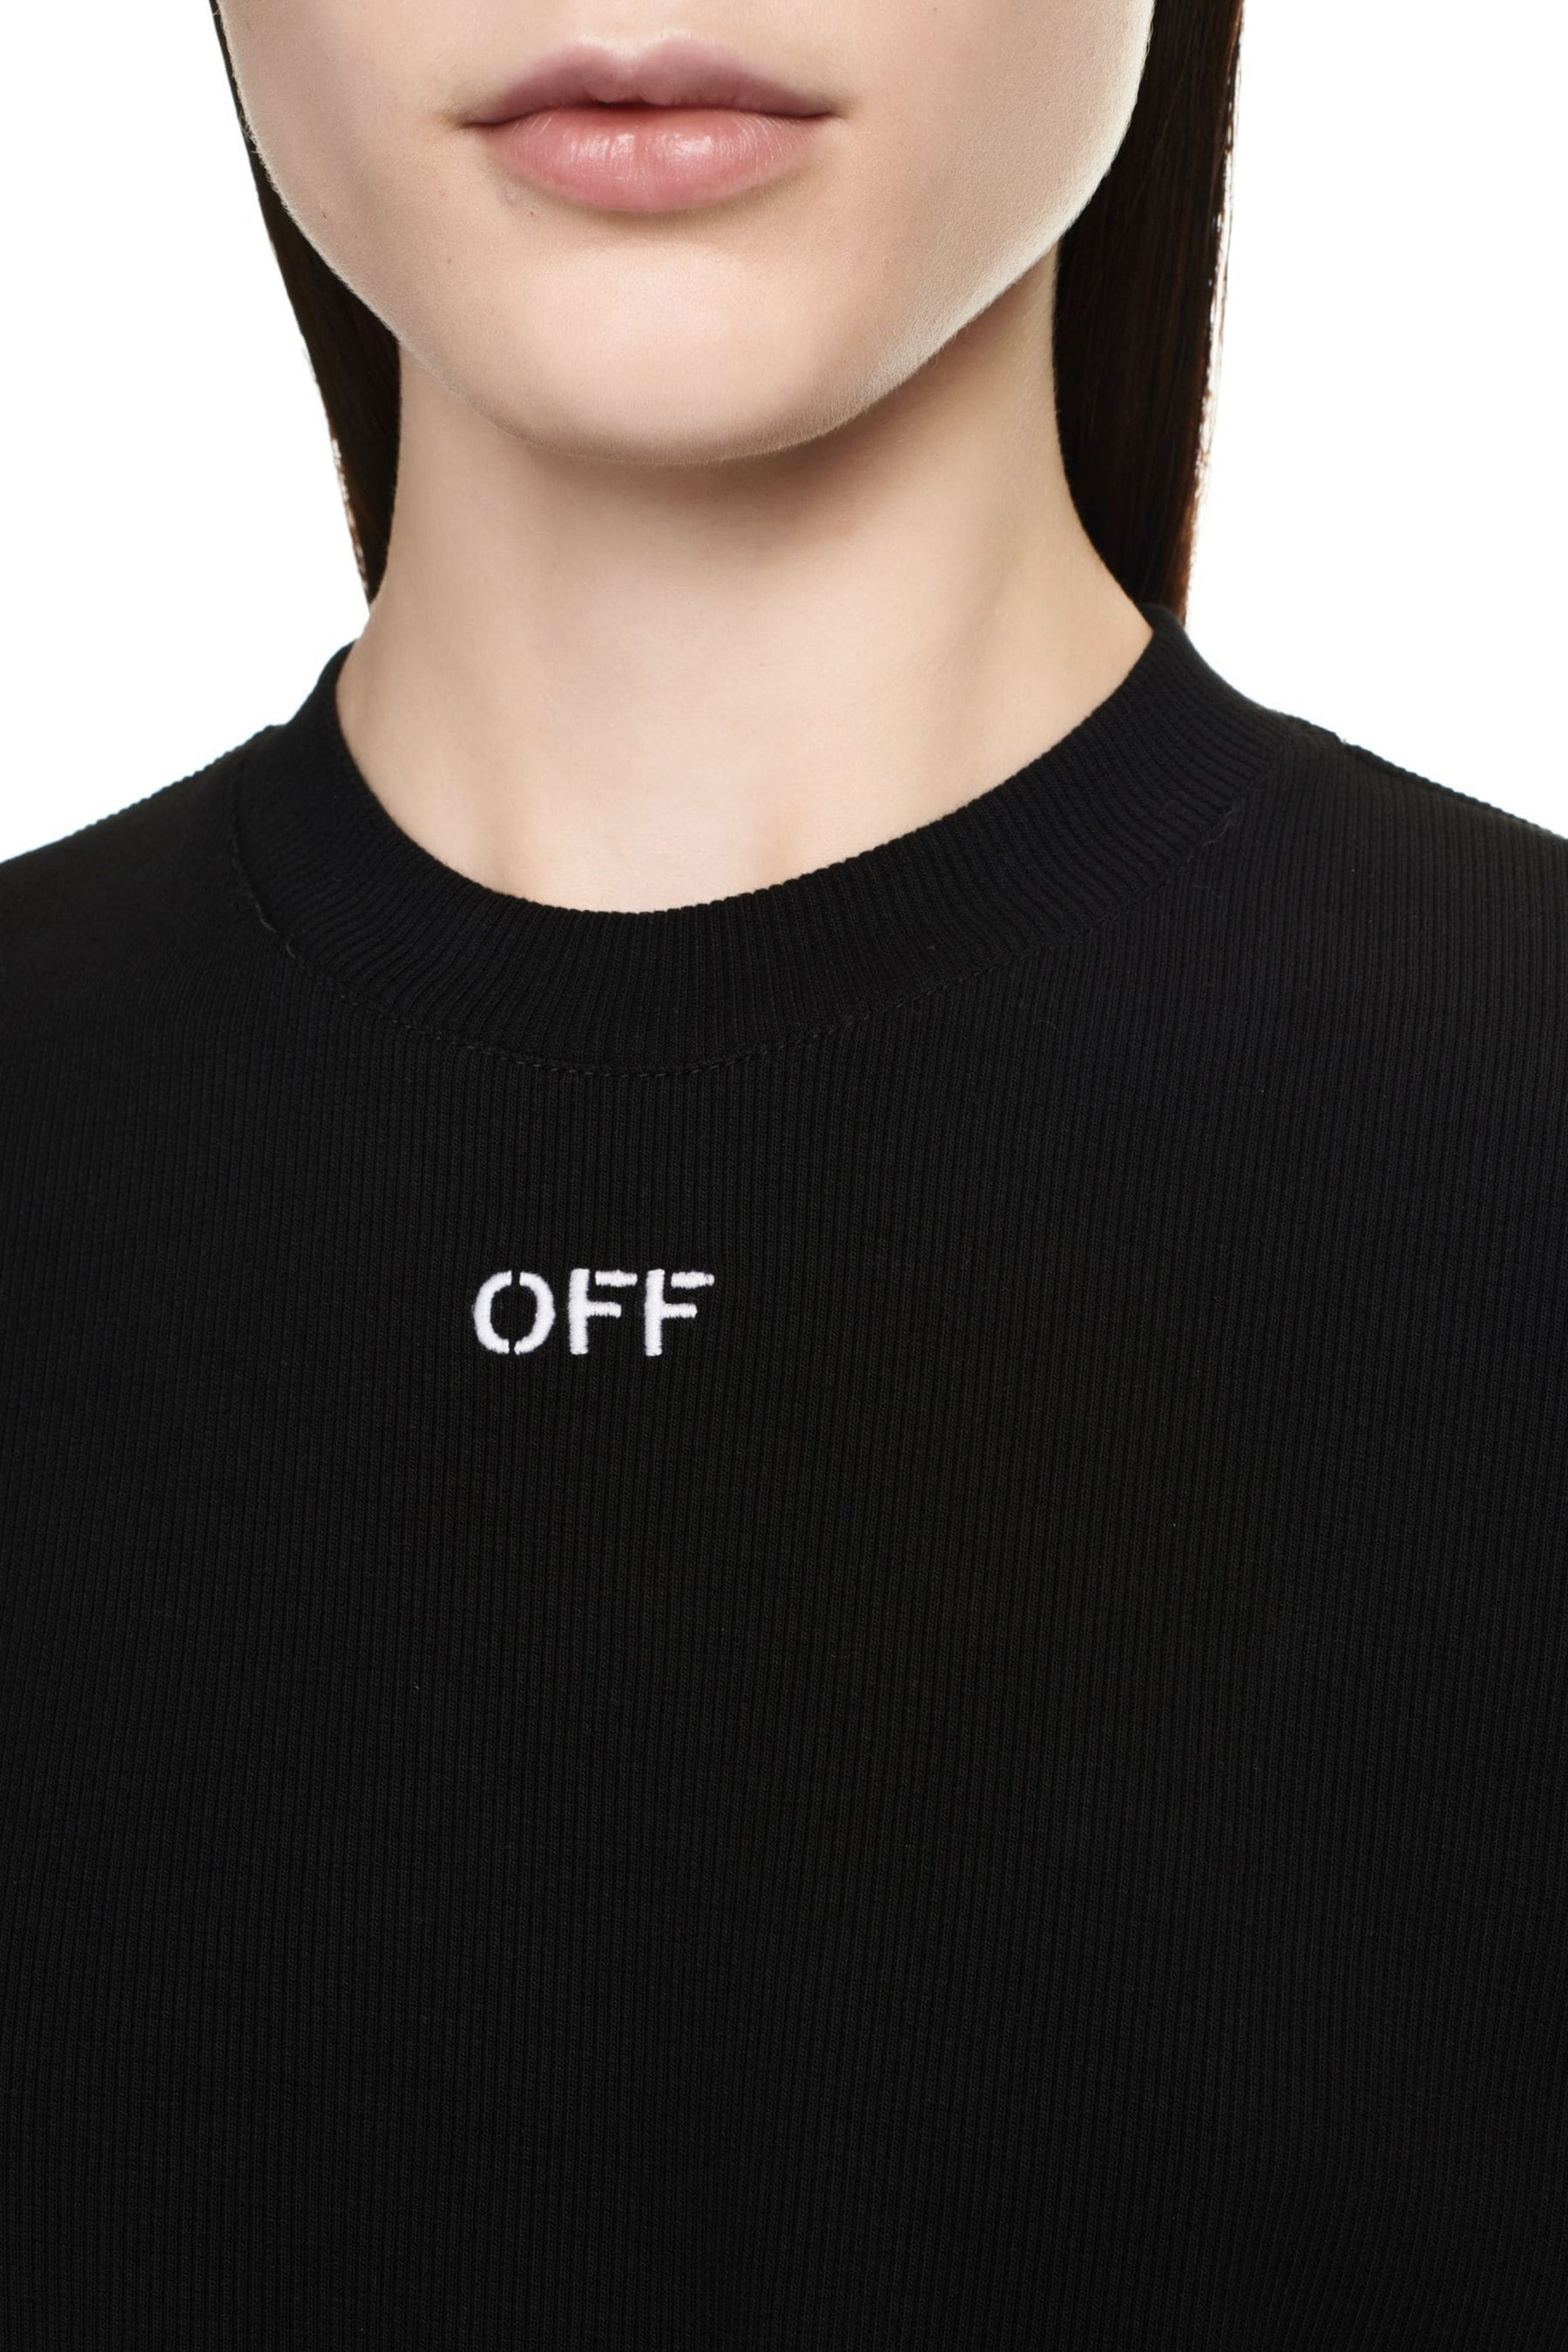 OFF STAMP RIB CROPPED TEE / BLK WHT - 5